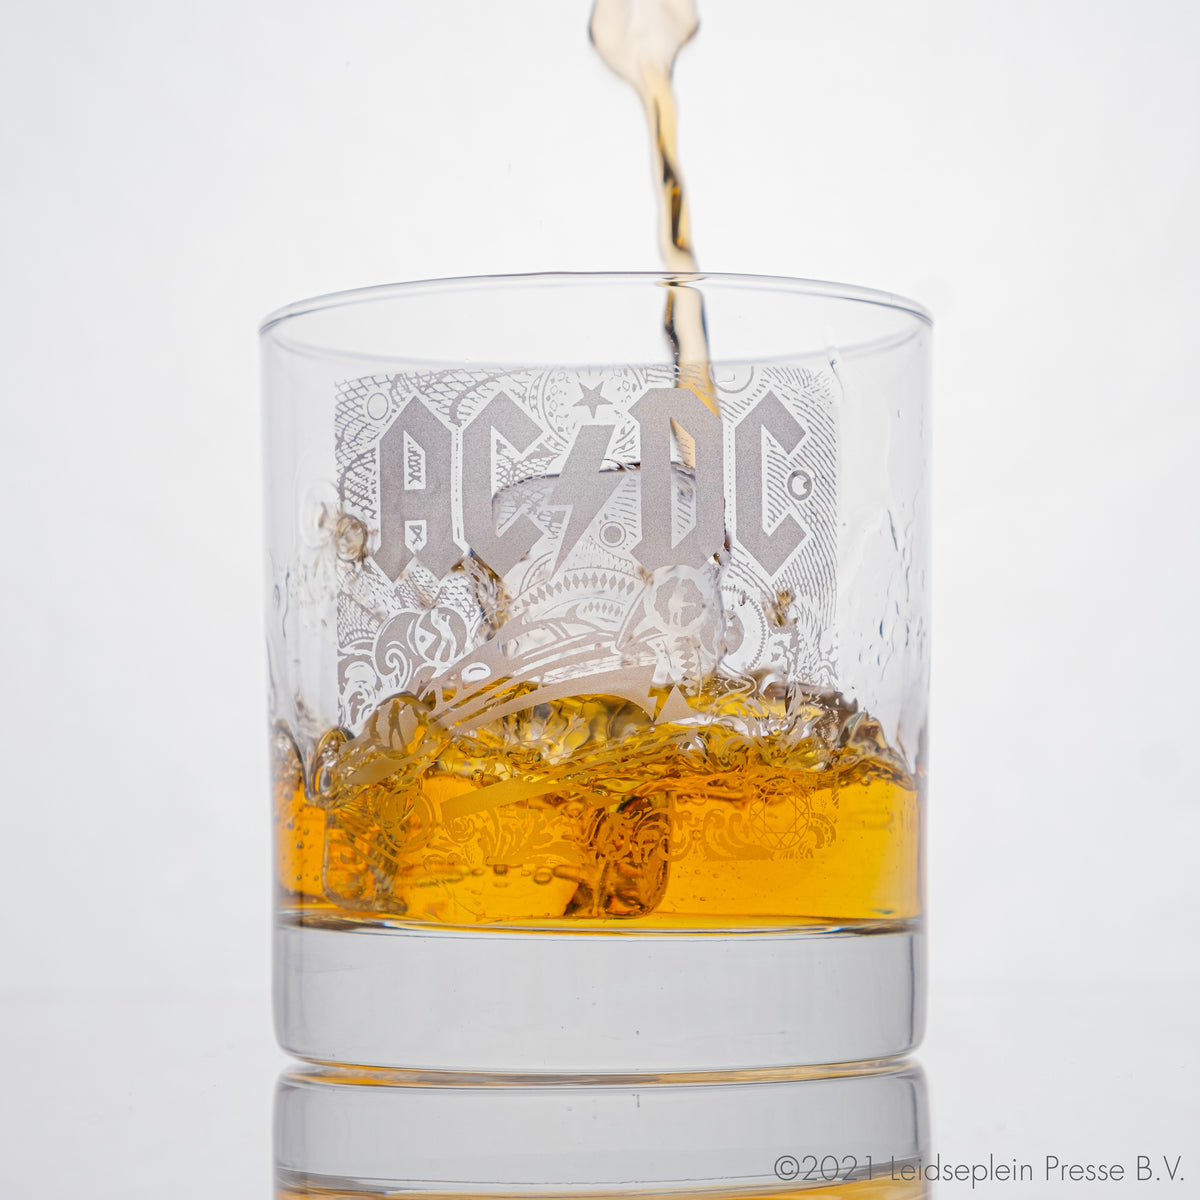 AC/DC: “Rock n’ Roll Train” Etched Whiskey Glass